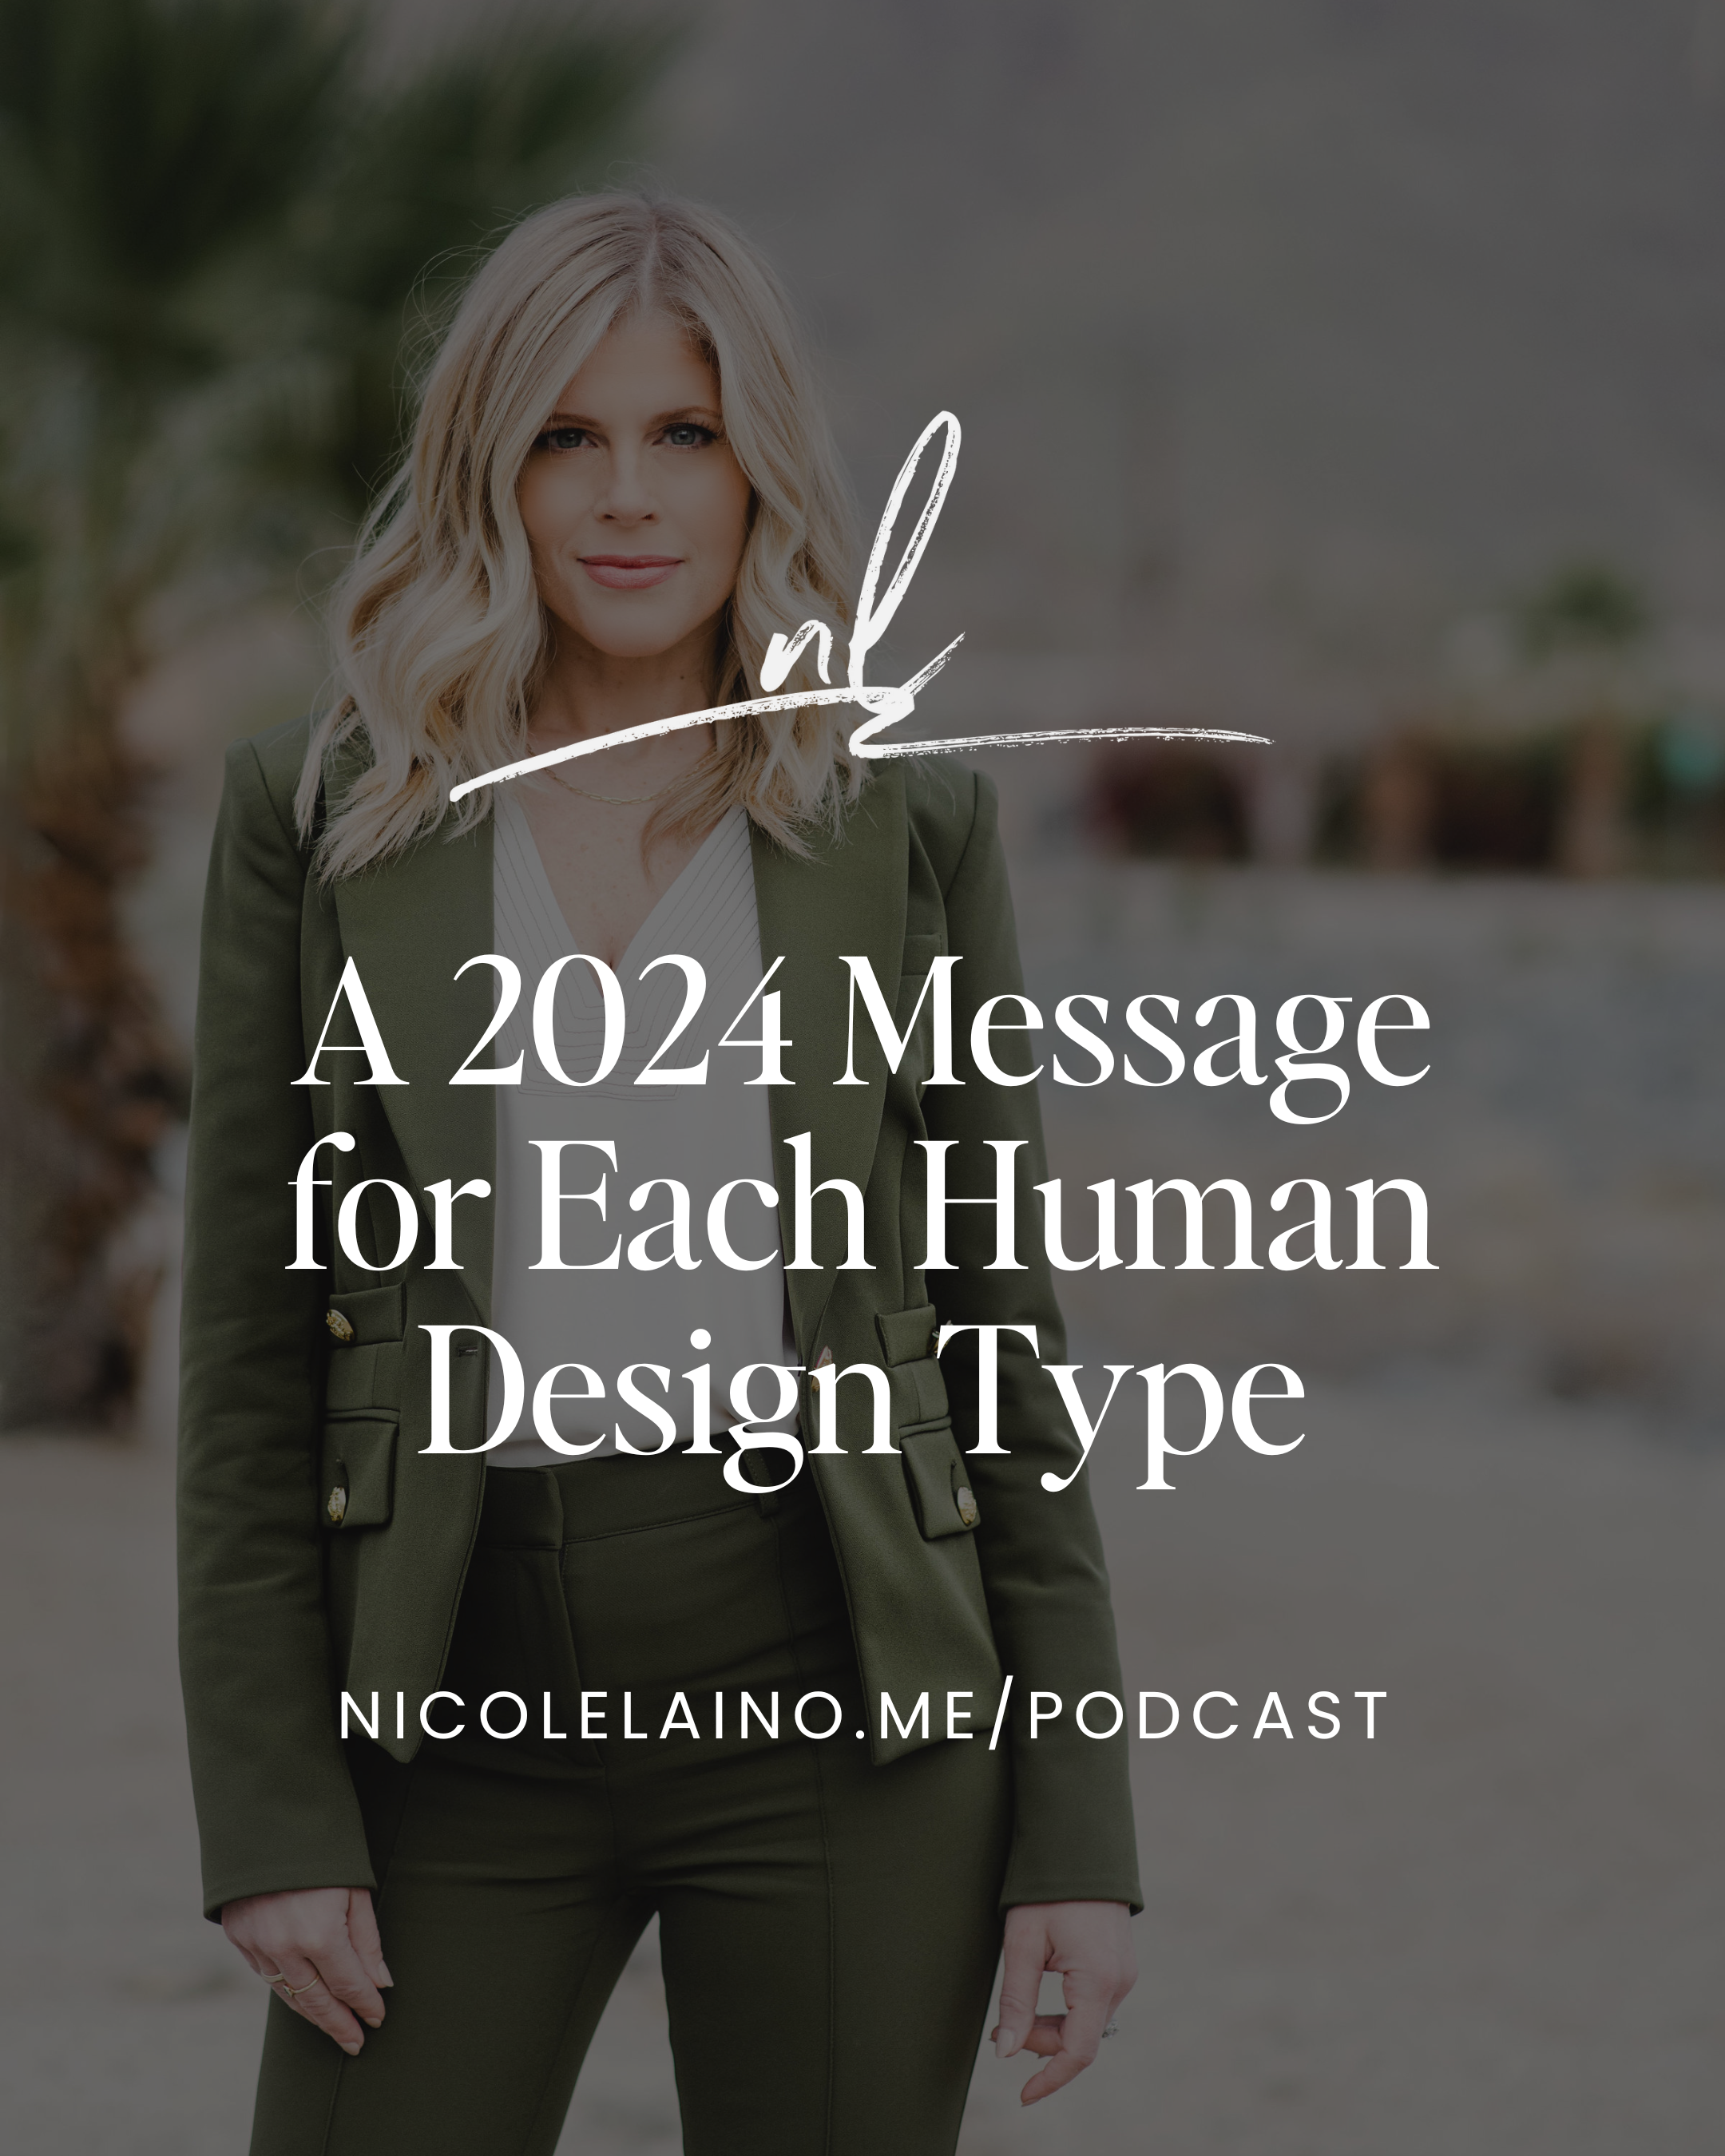 A 2024 Message for Each Human Design Type